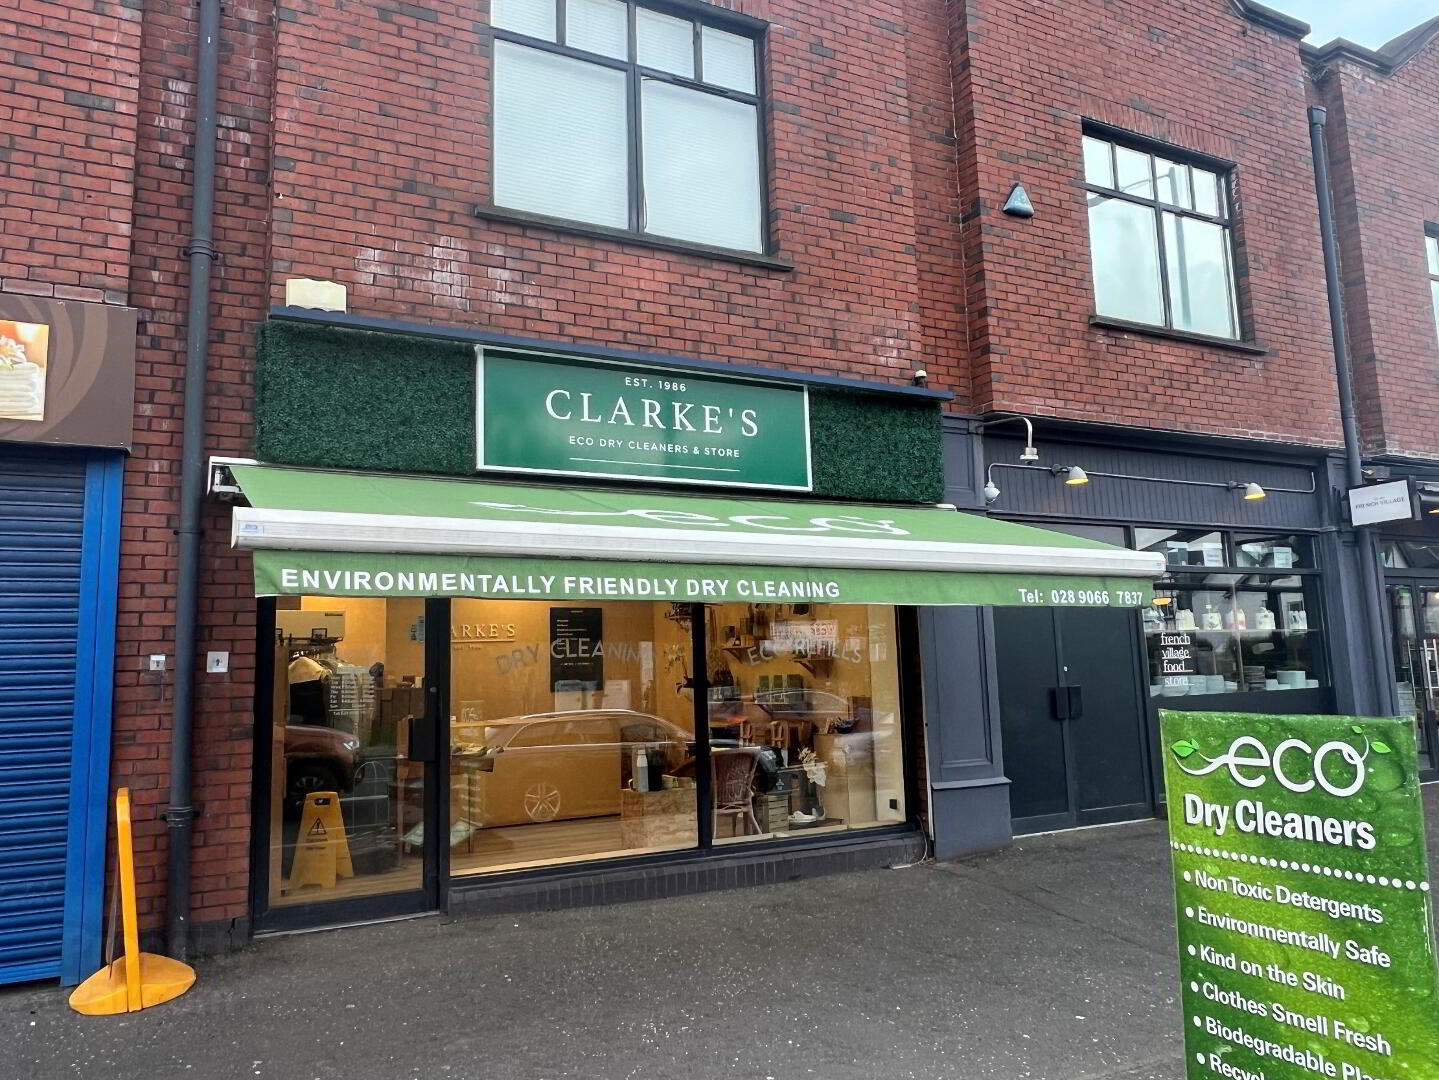 Clarke's Eco Dry Cleaners & Store, Unit 3, The Lesley Building